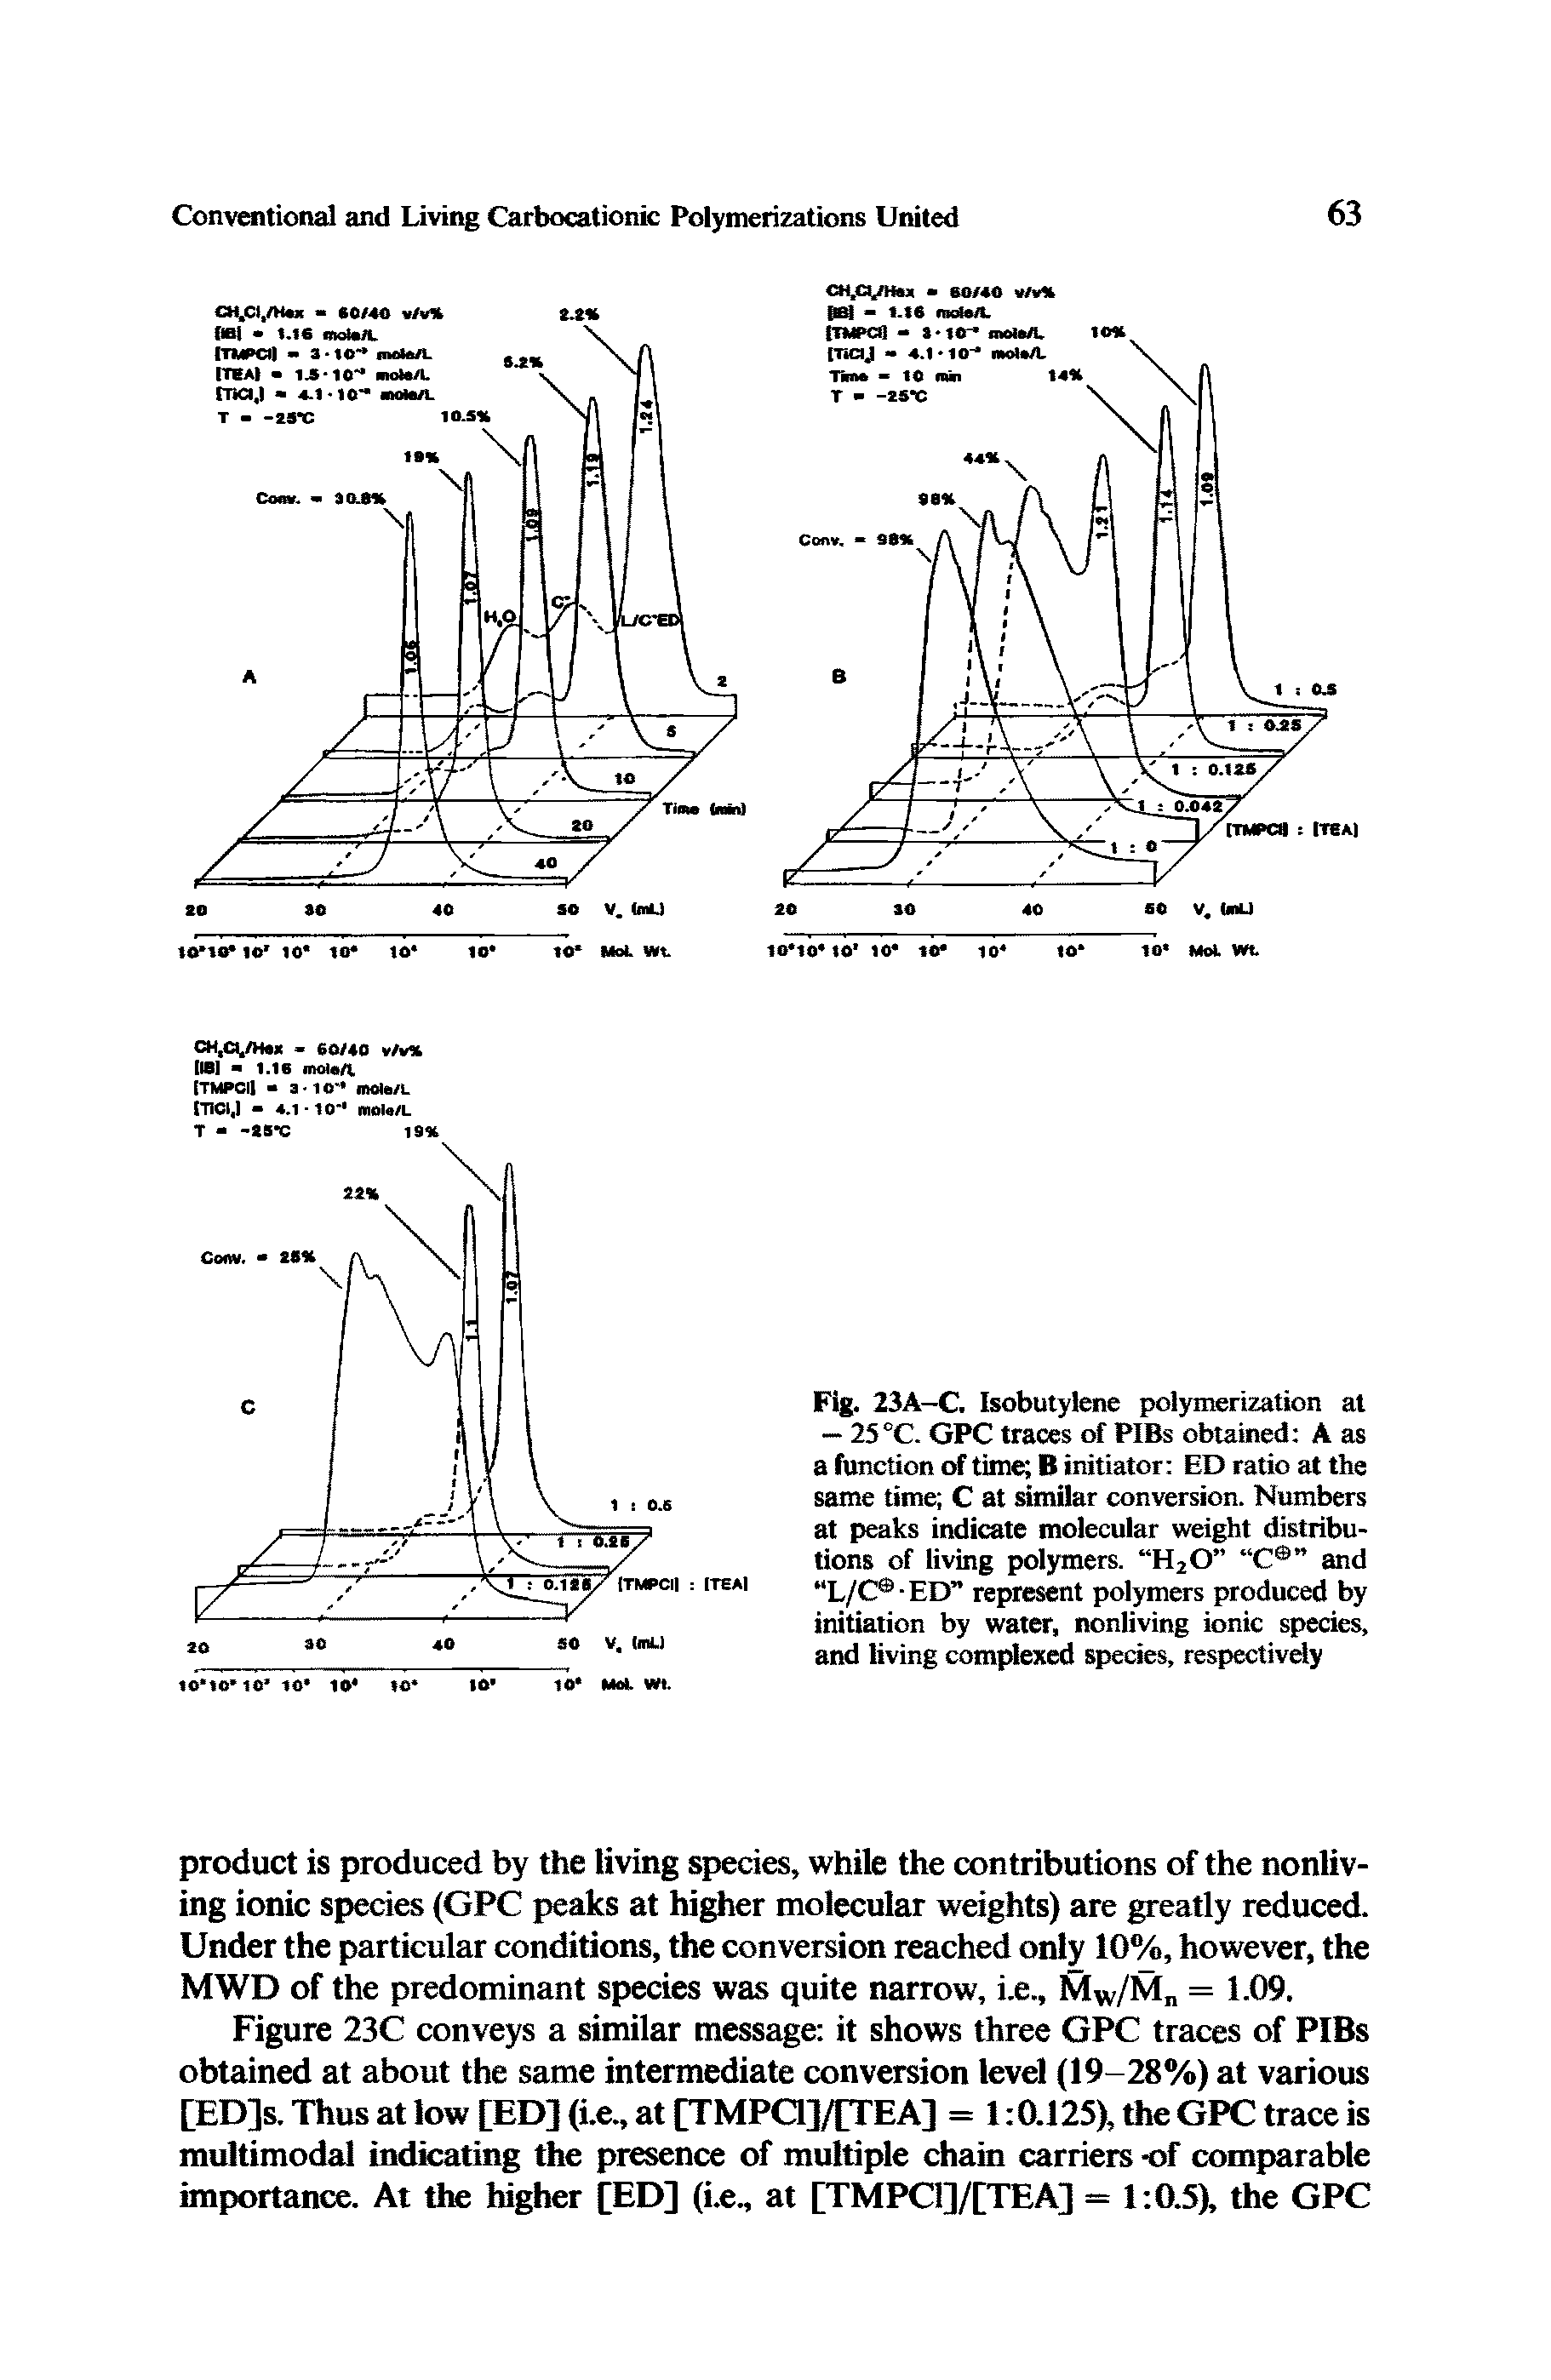 Fig. 23A-C. Isobutylene polymerization at — 25 °C. GPC traces of PIBs obtained A as a function of time B initiator ED ratio at the same time C at similar conversion. Numbers at peaks indicate molecular weight distributions of living polymers. H20 C and L/C -ED represent polymers produced by initiation by water, nonliving ionic species, and living complexed species, respectively...